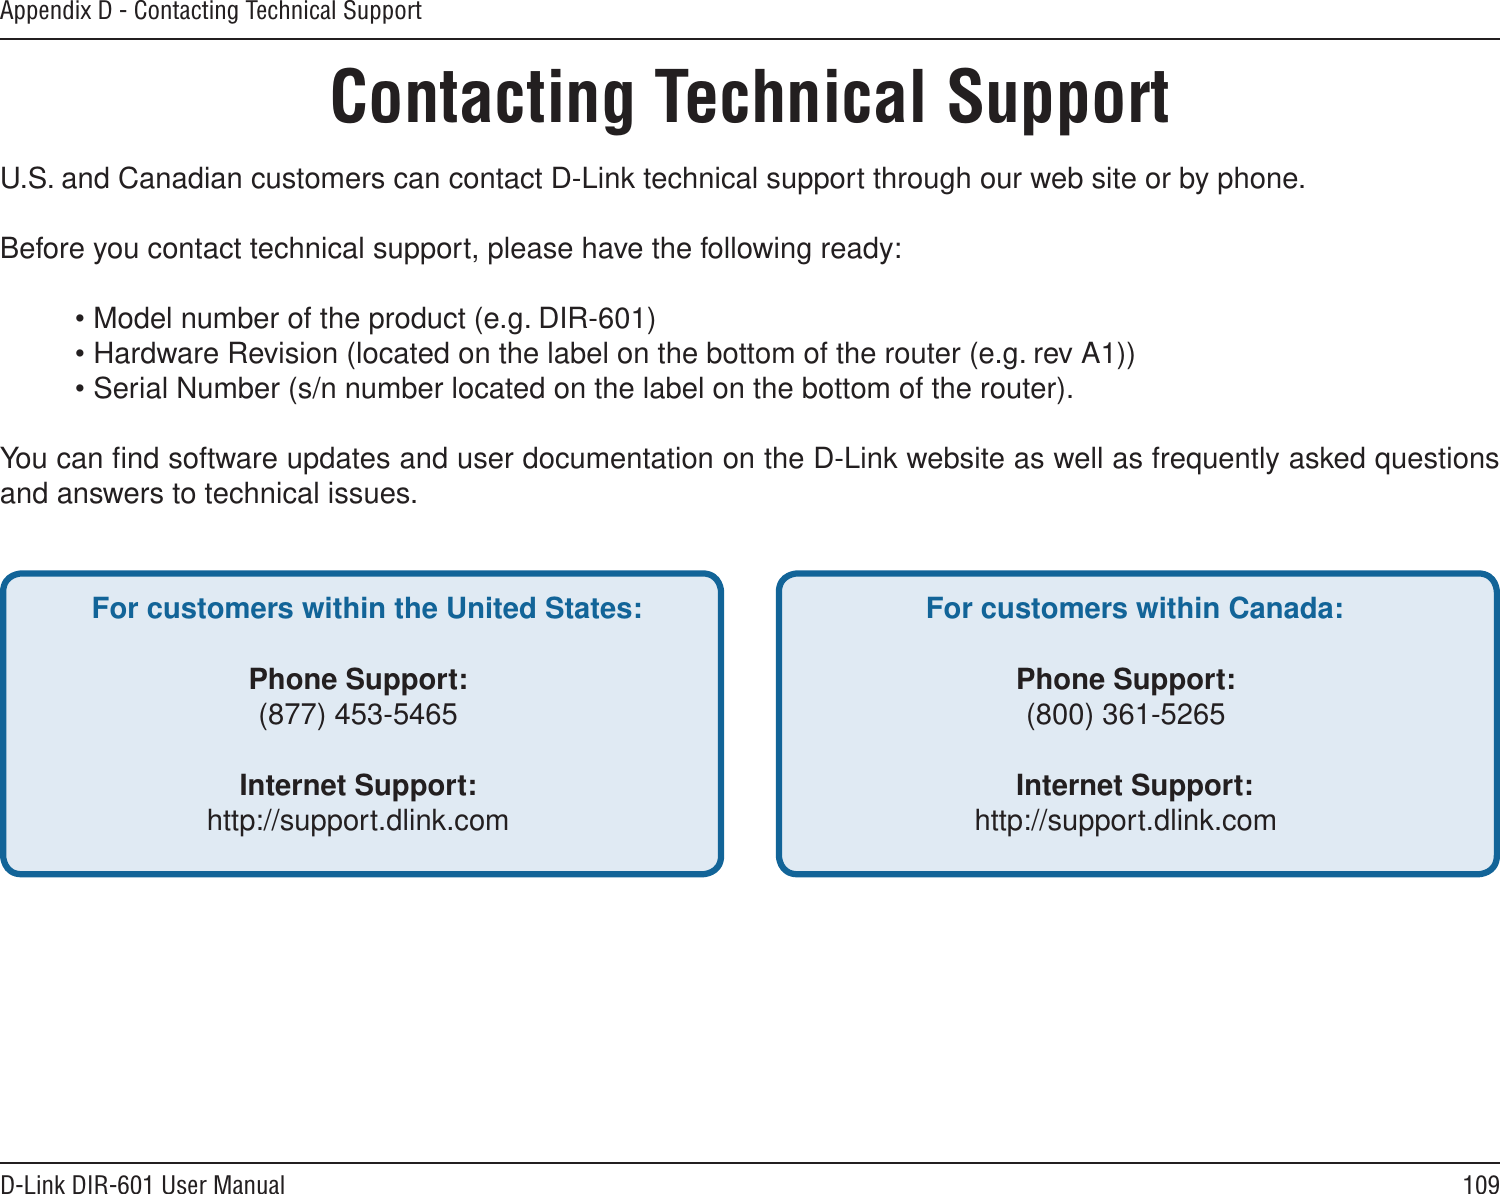 109D-Link DIR-601 User ManualAppendix D - Contacting Technical SupportContacting Technical SupportU.S. and Canadian customers can contact D-Link technical support through our web site or by phone.Before you contact technical support, please have the following ready:  • Model number of the product (e.g. DIR-601)  • Hardware Revision (located on the label on the bottom of the router (e.g. rev A1))  • Serial Number (s/n number located on the label on the bottom of the router). You can ﬁnd software updates and user documentation on the D-Link website as well as frequently asked questions and answers to technical issues.For customers within the United States: Phone Support:(877) 453-5465Internet Support:http://support.dlink.com For customers within Canada: Phone Support:(800) 361-5265 Internet Support:http://support.dlink.com